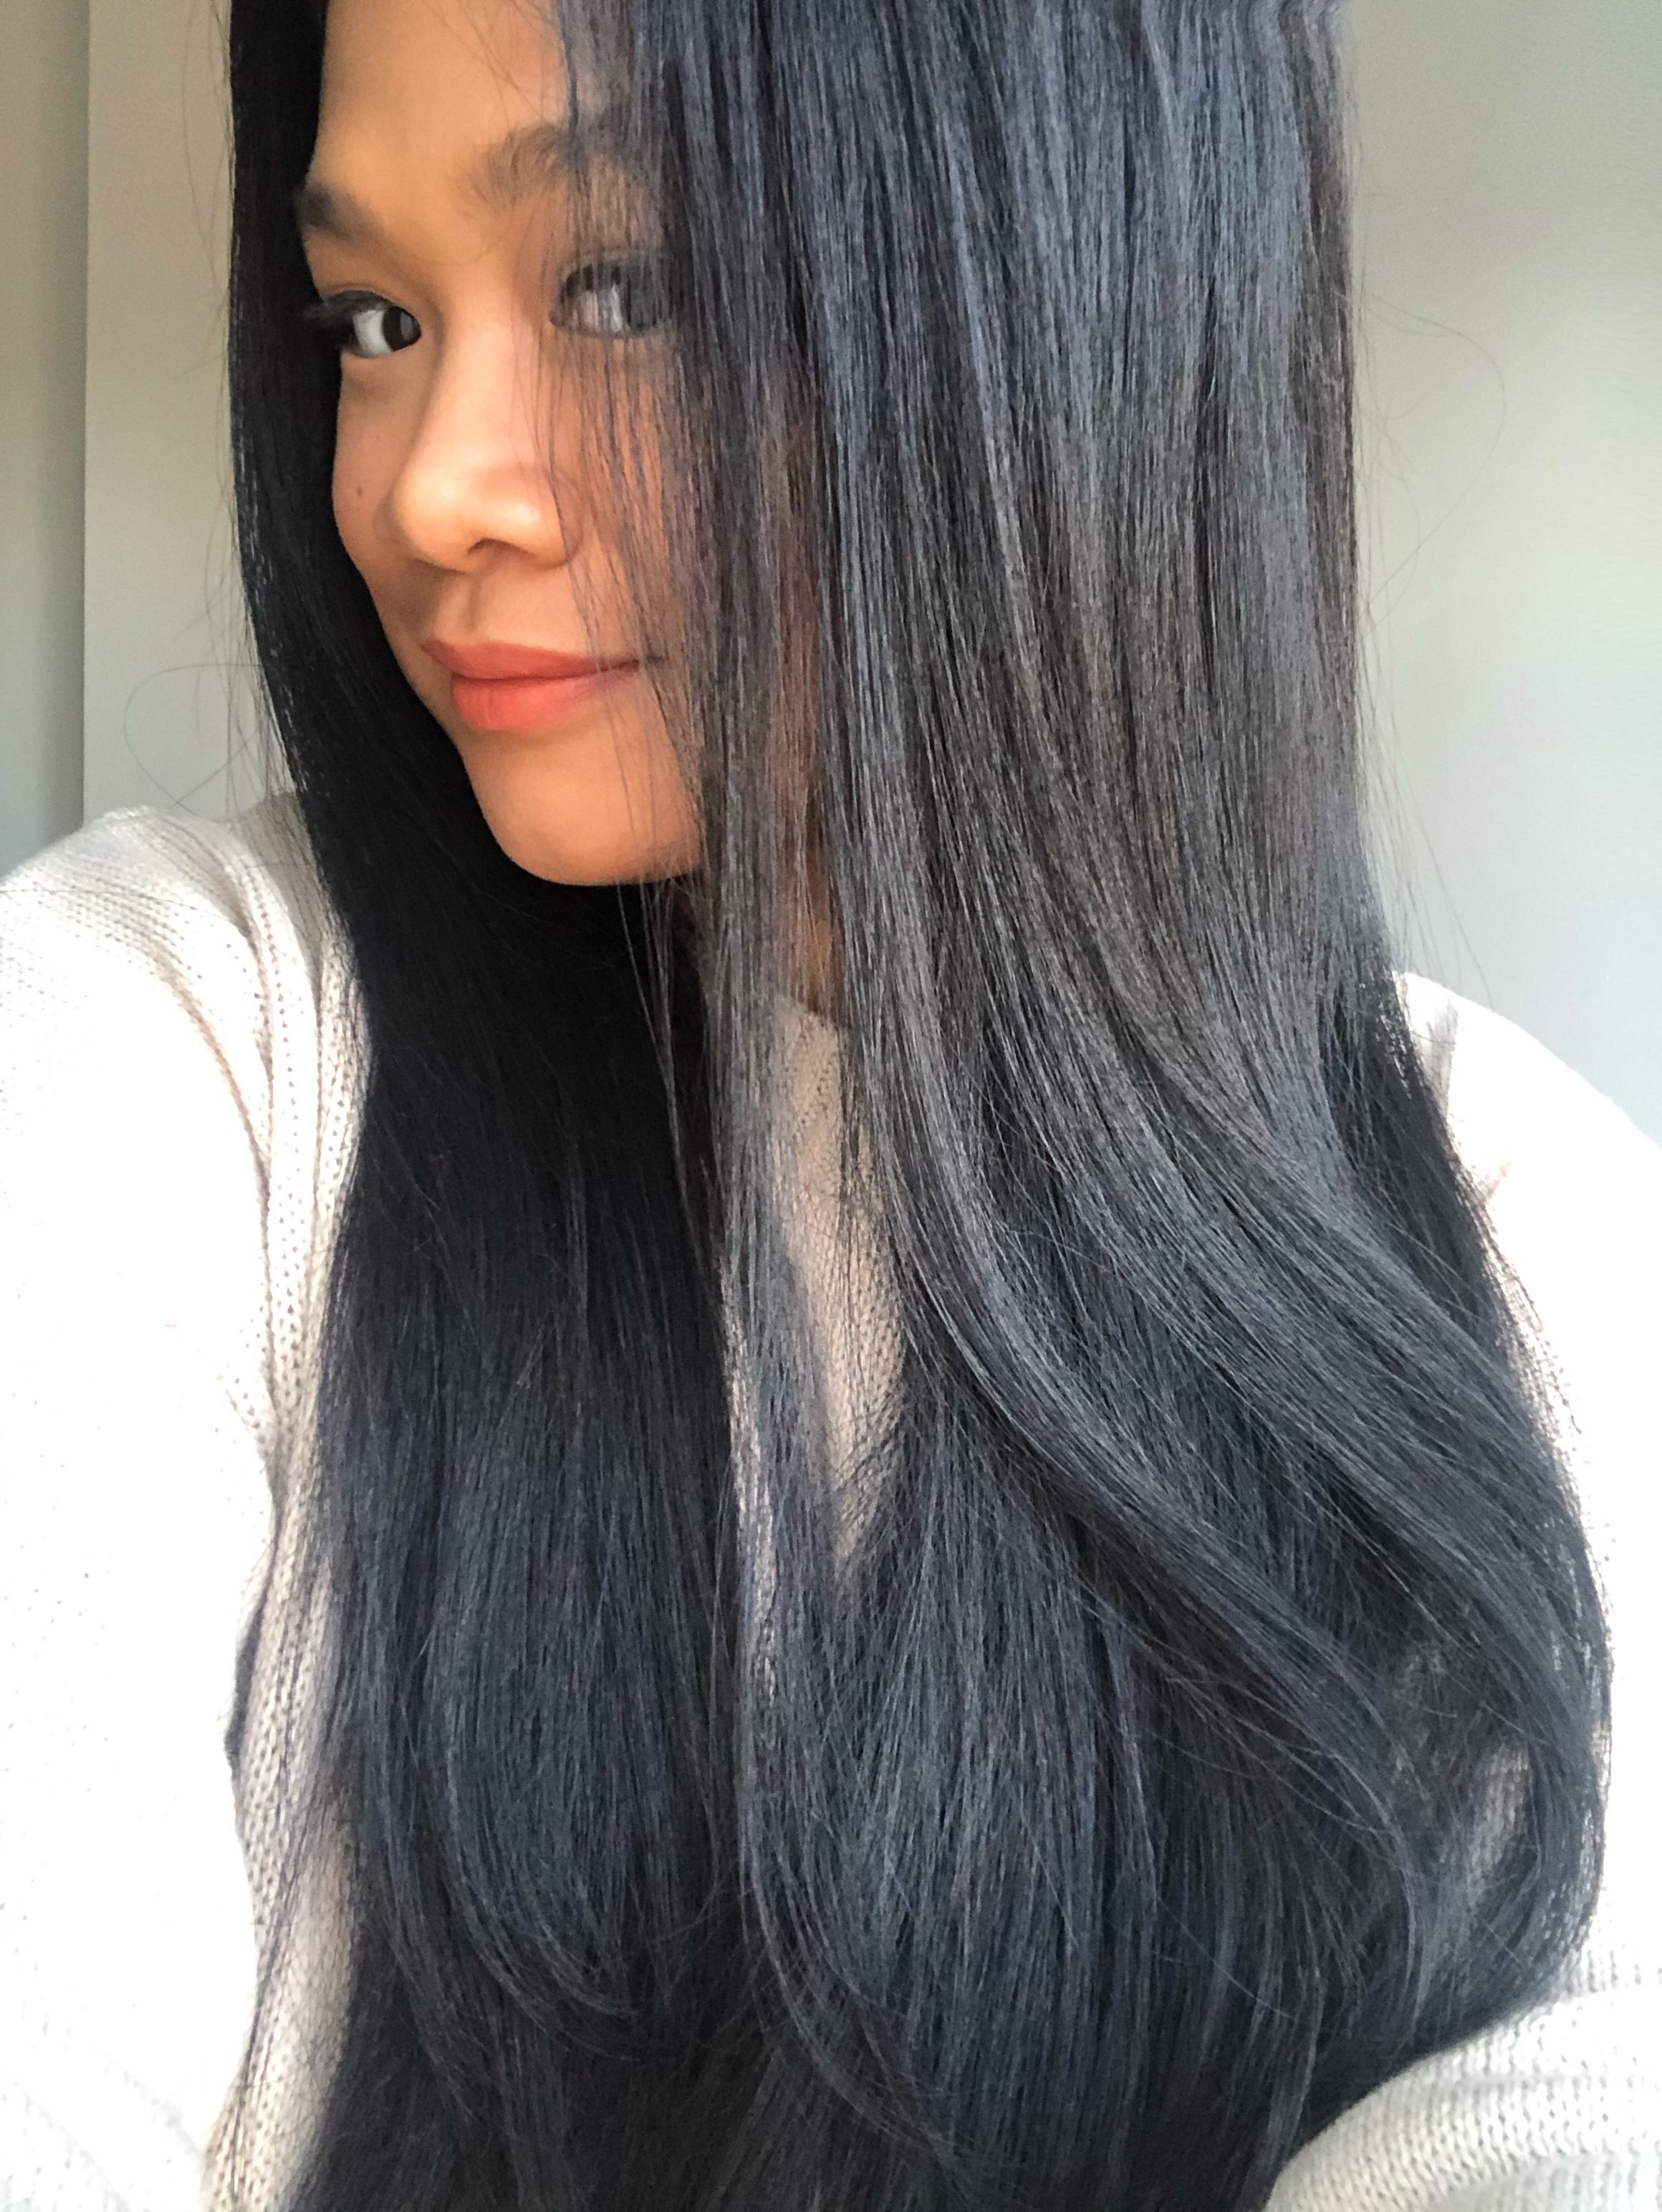 Our honest ghd Platinum+ review with before and after pics